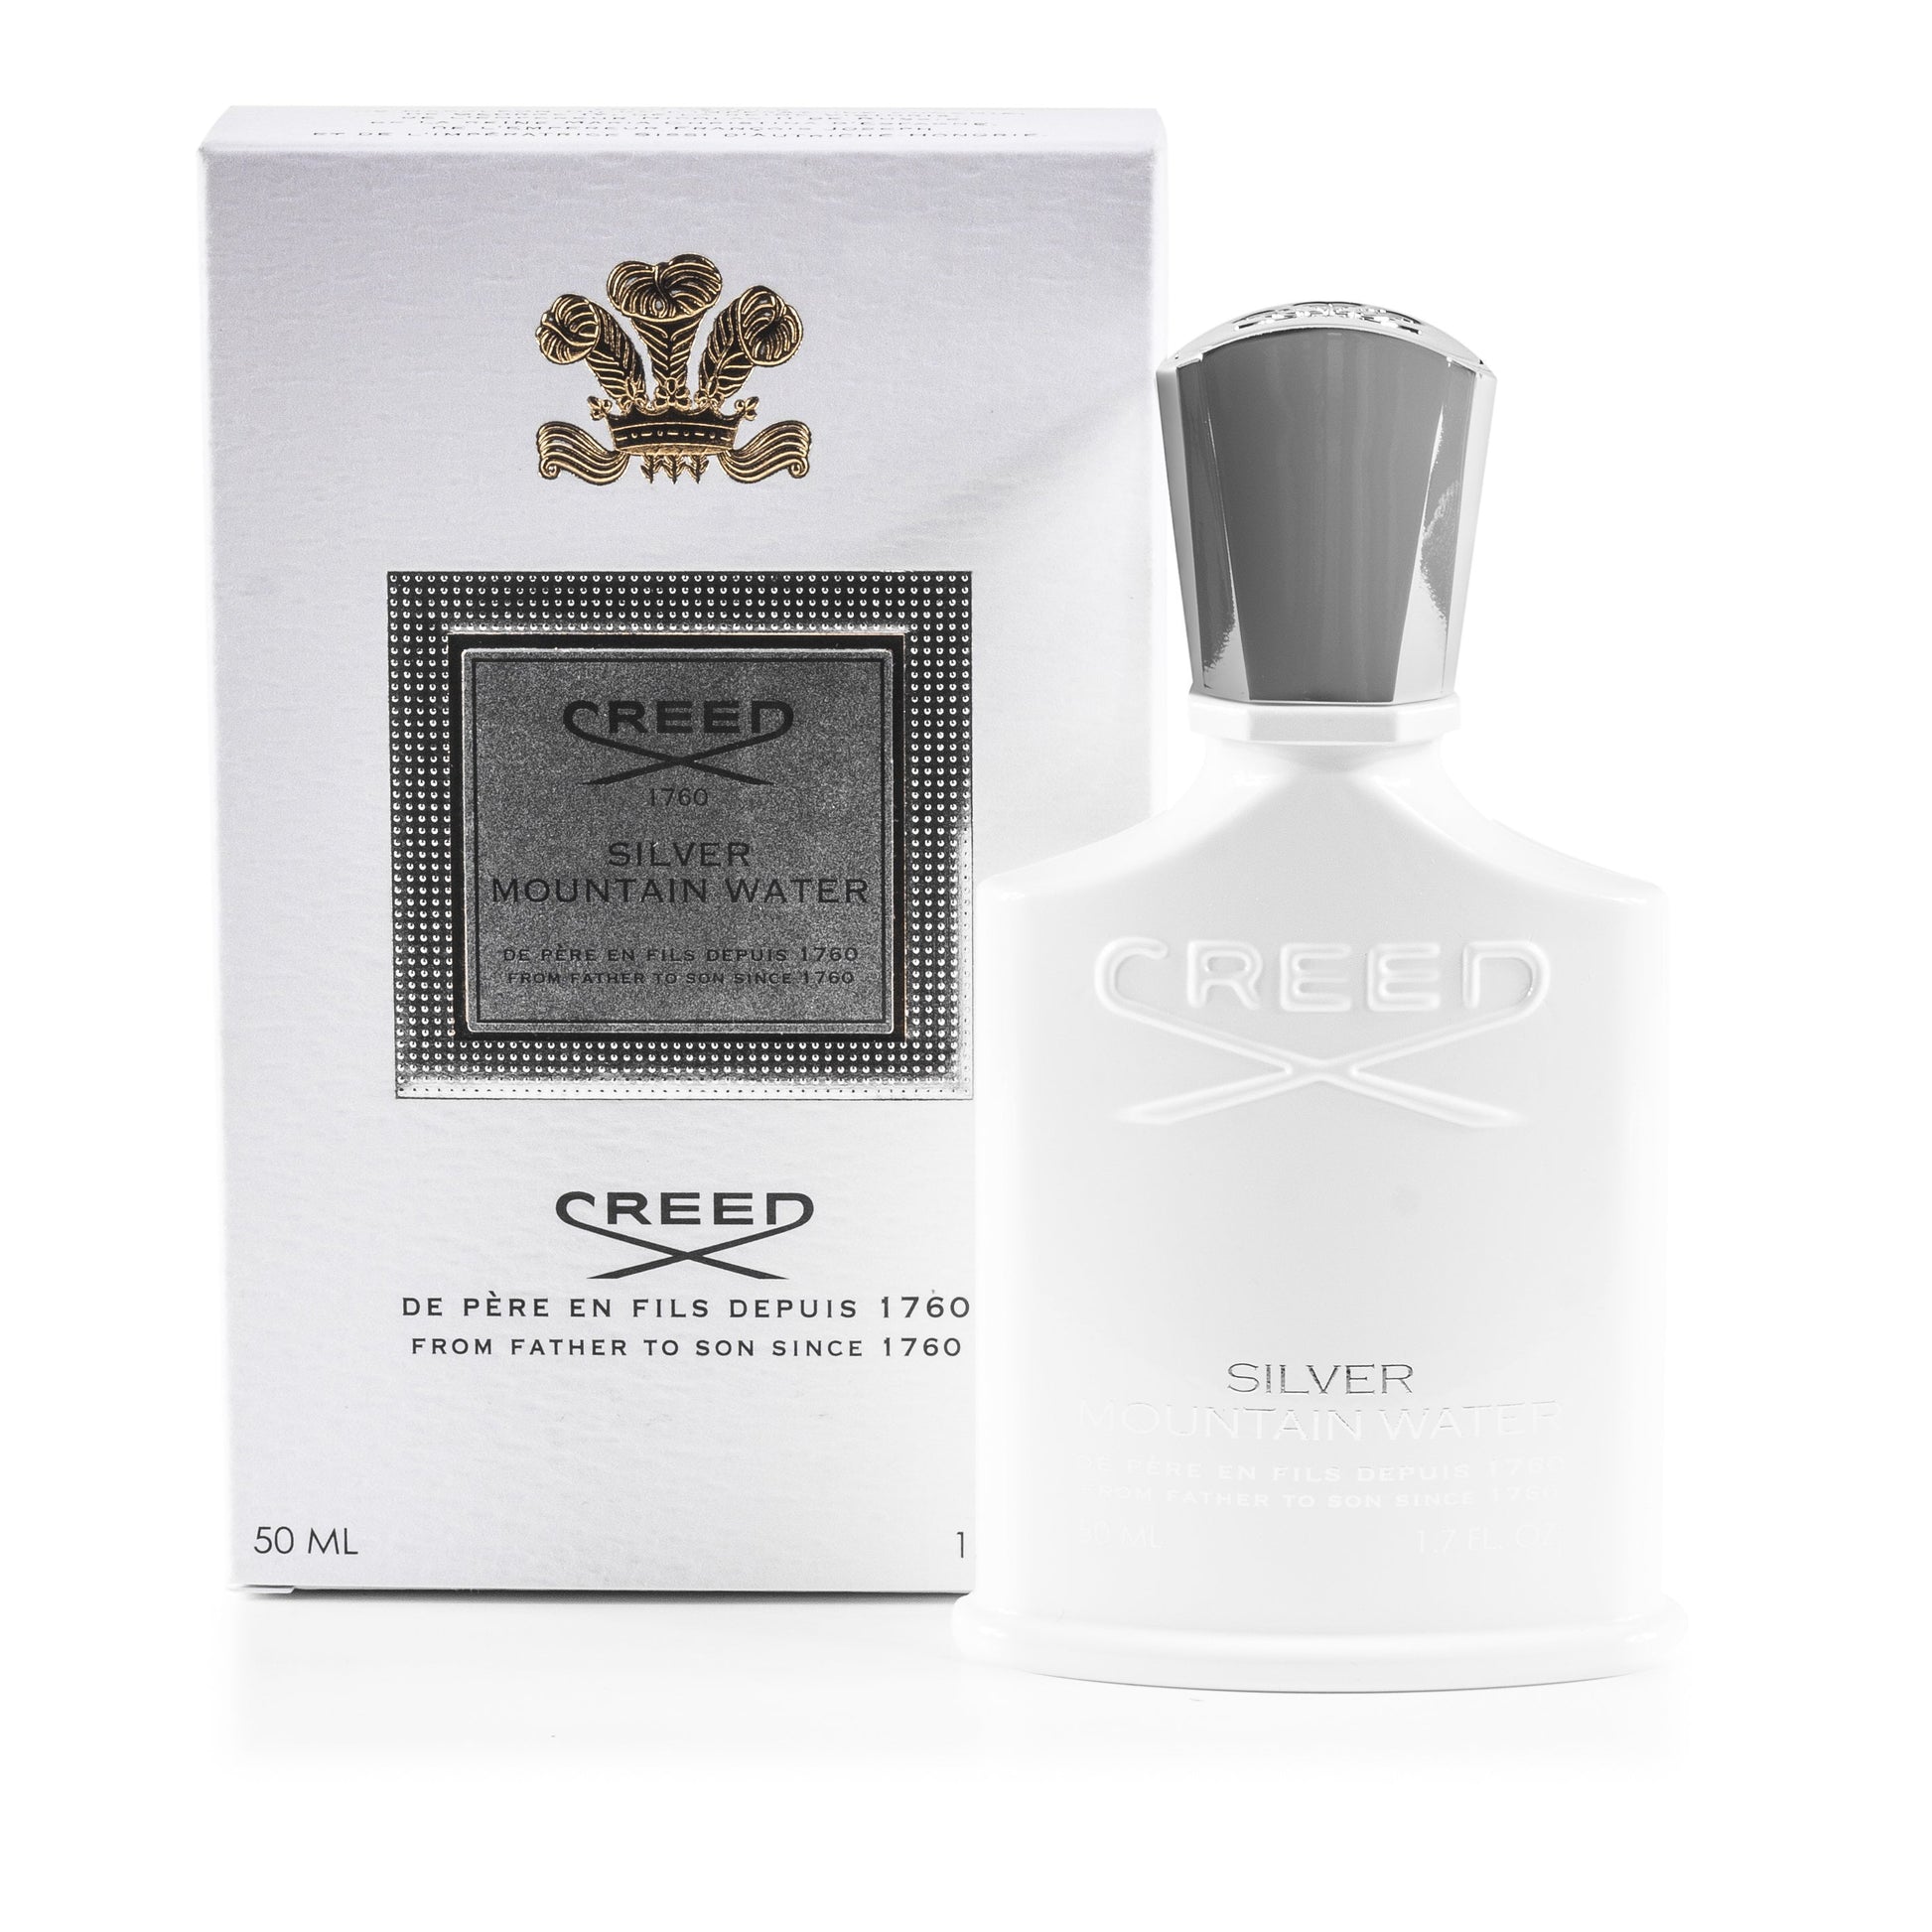 Silver Mountain Water Eau de Parfum Spray for Men by Creed, Product image 7